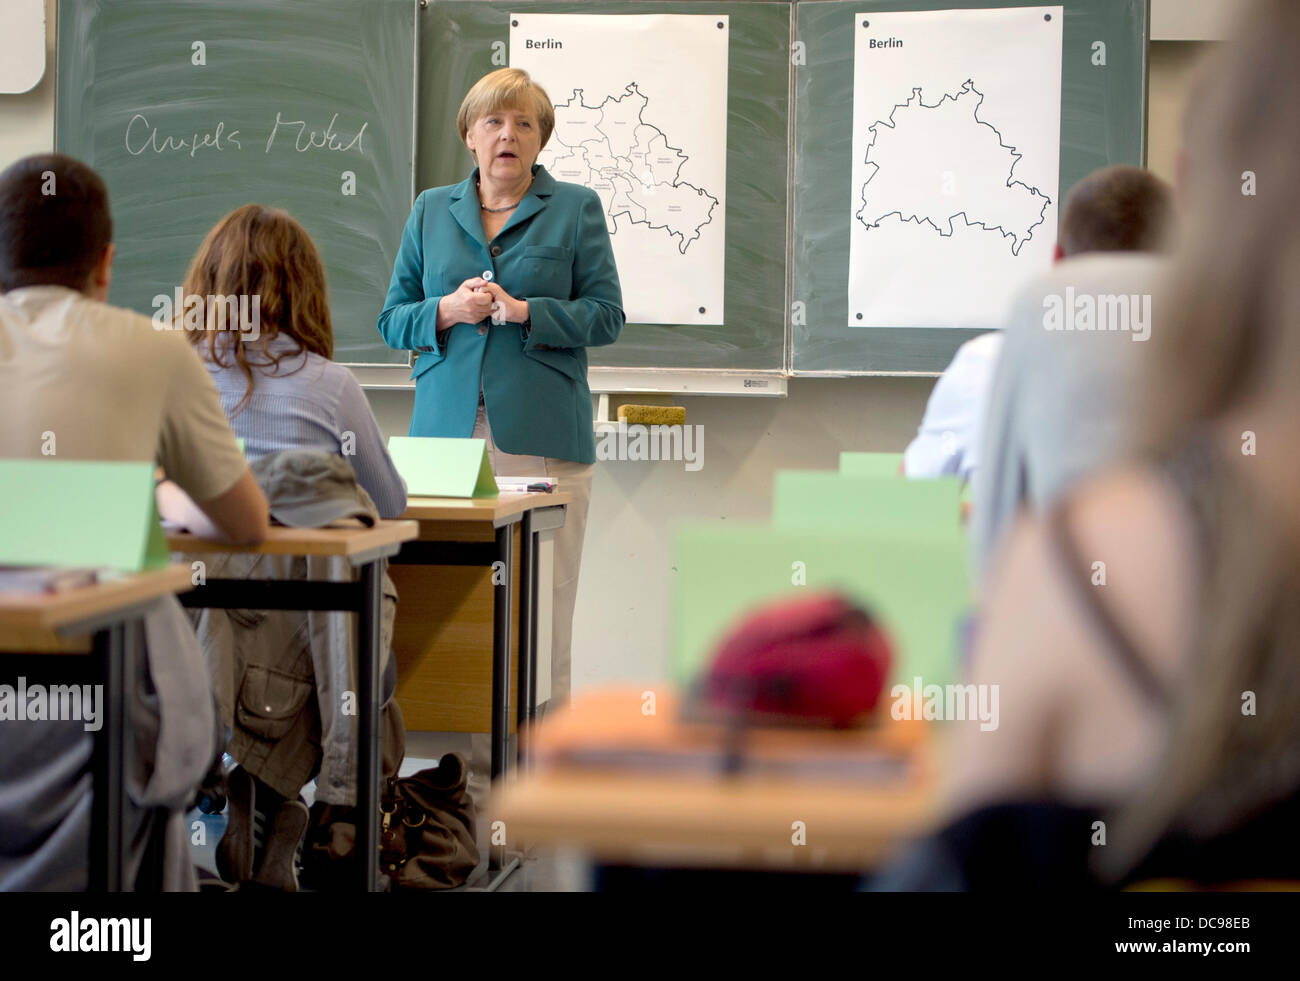 Berlin, Germany. 13th Aug, 2013. After writing her name on the black board (L) German Chancellor Angela Merkel starts her lecture on the building of the Berlin wall August 13th,1961 to a 12th grade class during her visit to the Heinrich Schliemann Gymnasium, secondary school in Berlin, Germany on August 13, 2013. Photo: Odd Andersen dpa (c) dpa/Alamy Live News Stock Photo